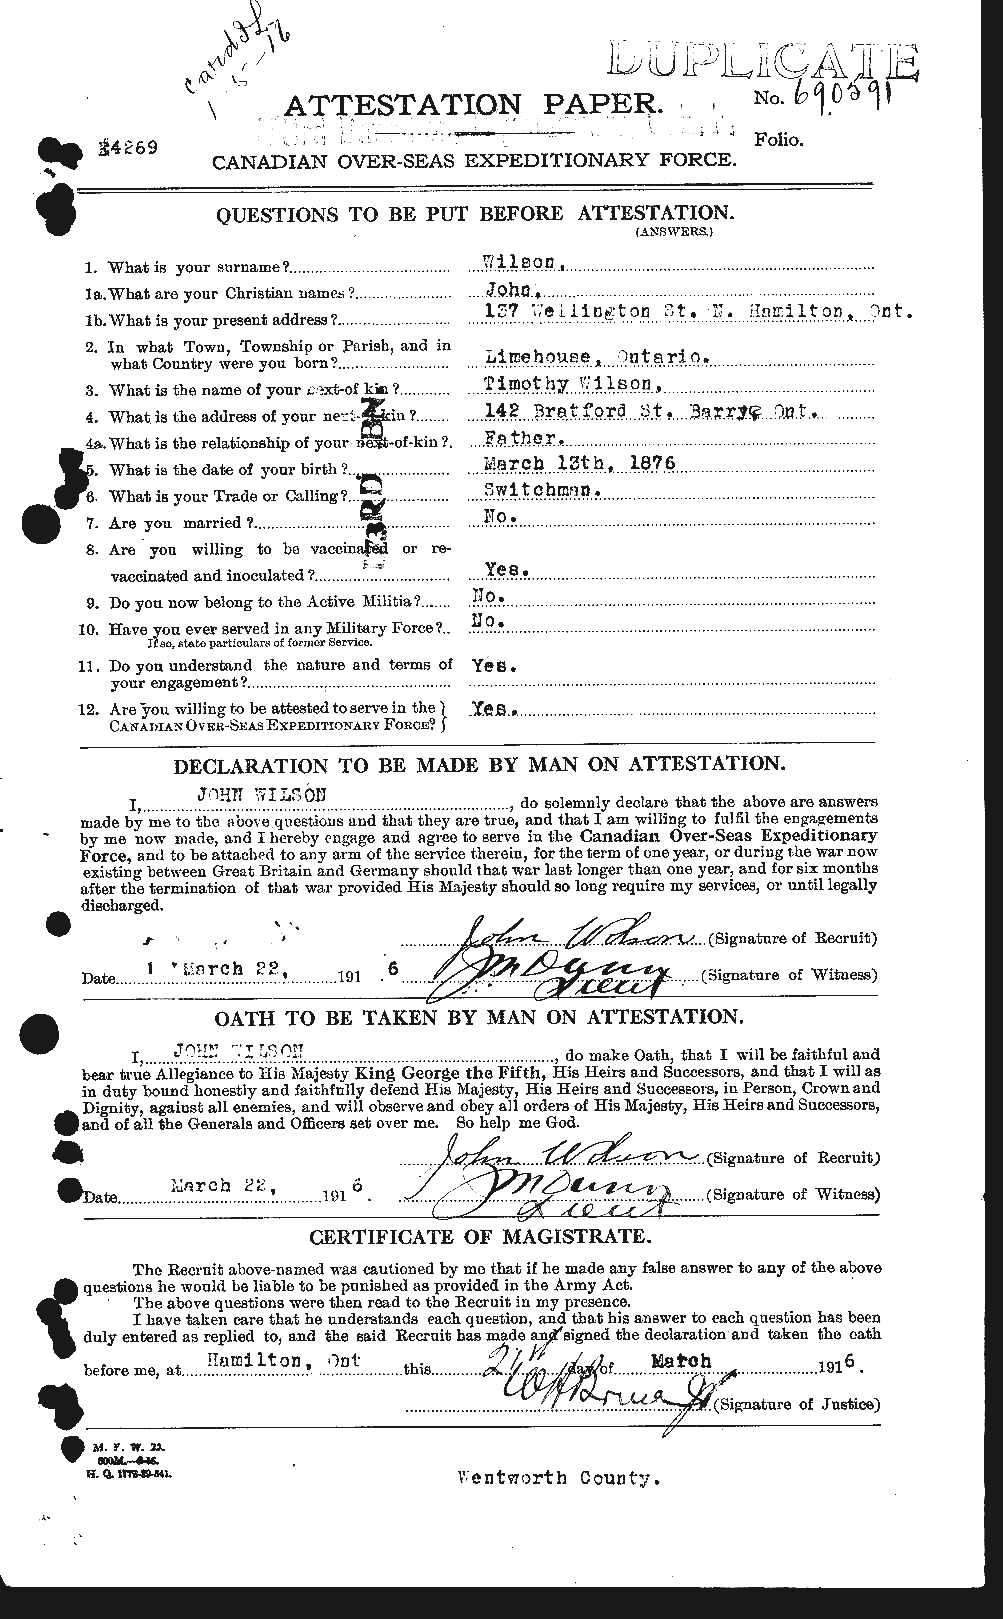 Personnel Records of the First World War - CEF 681589a